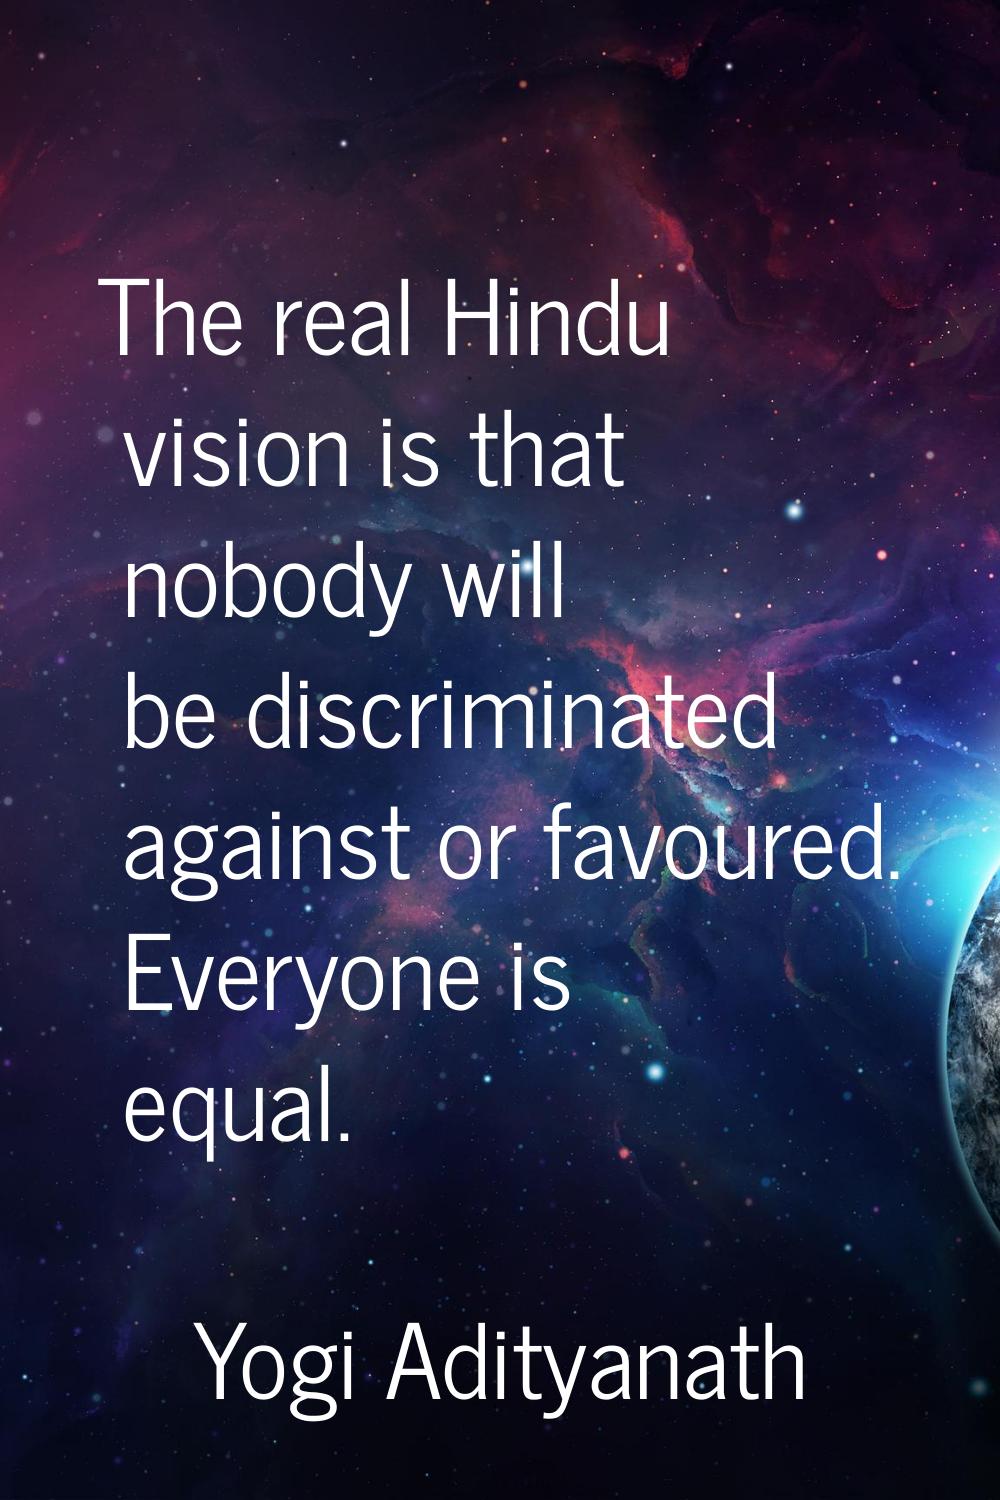 The real Hindu vision is that nobody will be discriminated against or favoured. Everyone is equal.